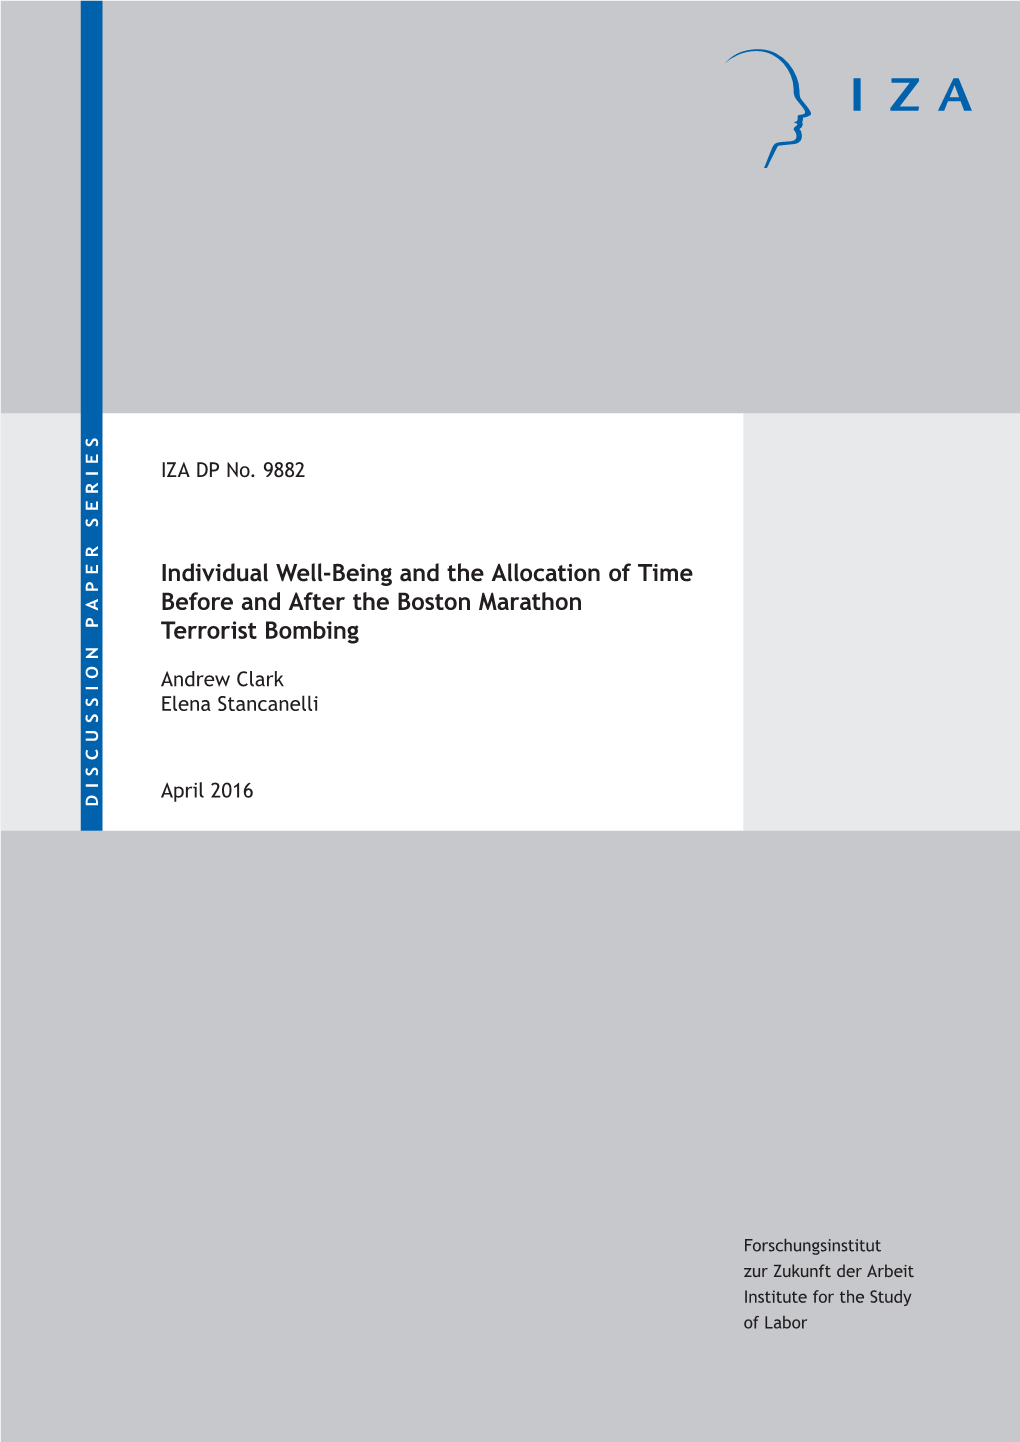 Individual Well-Being and the Allocation of Time Before and After the Boston Marathon Terrorist Bombing